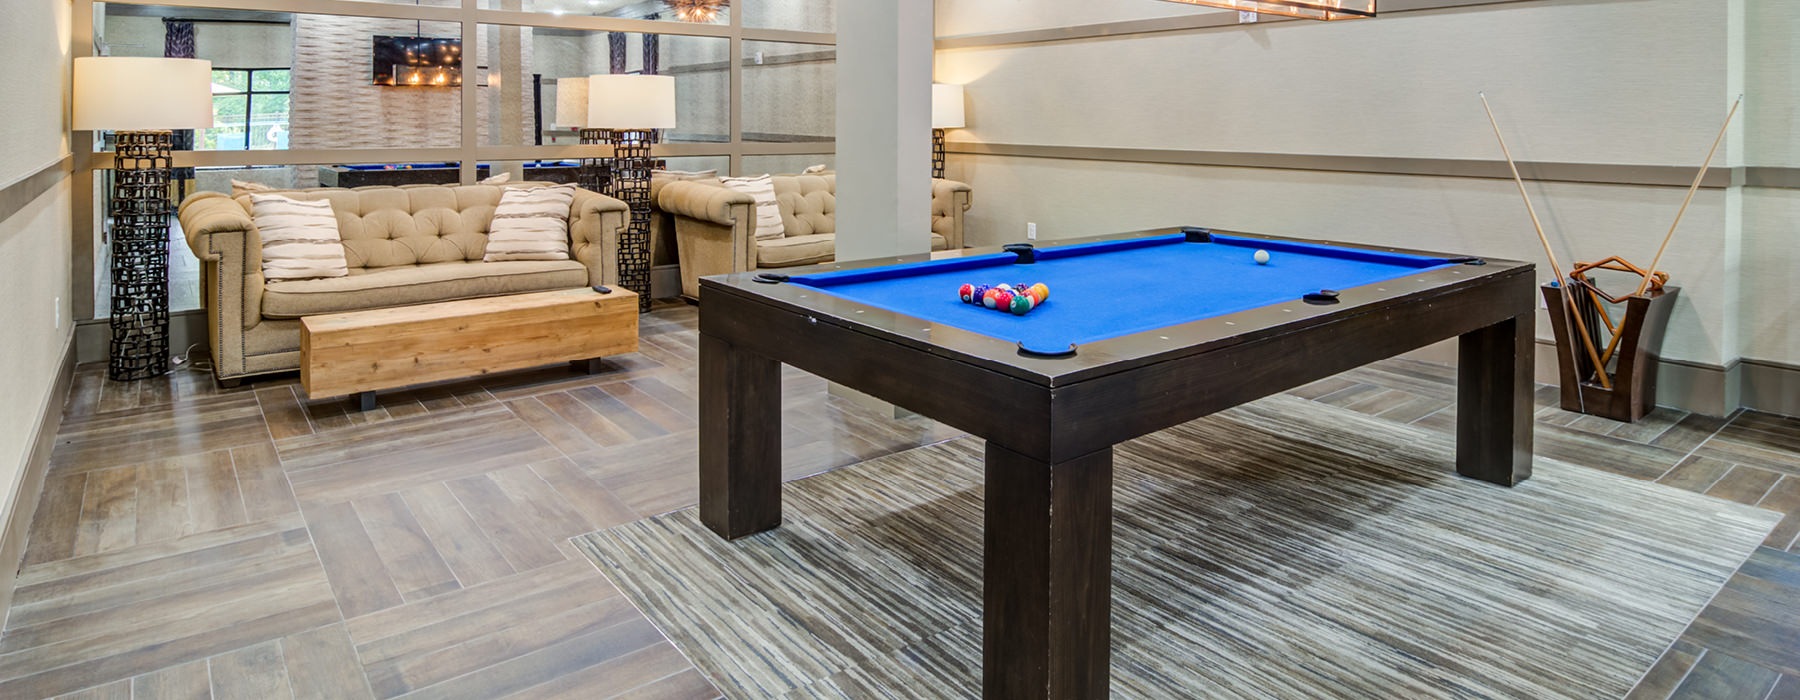 Clubhouse with pool table.